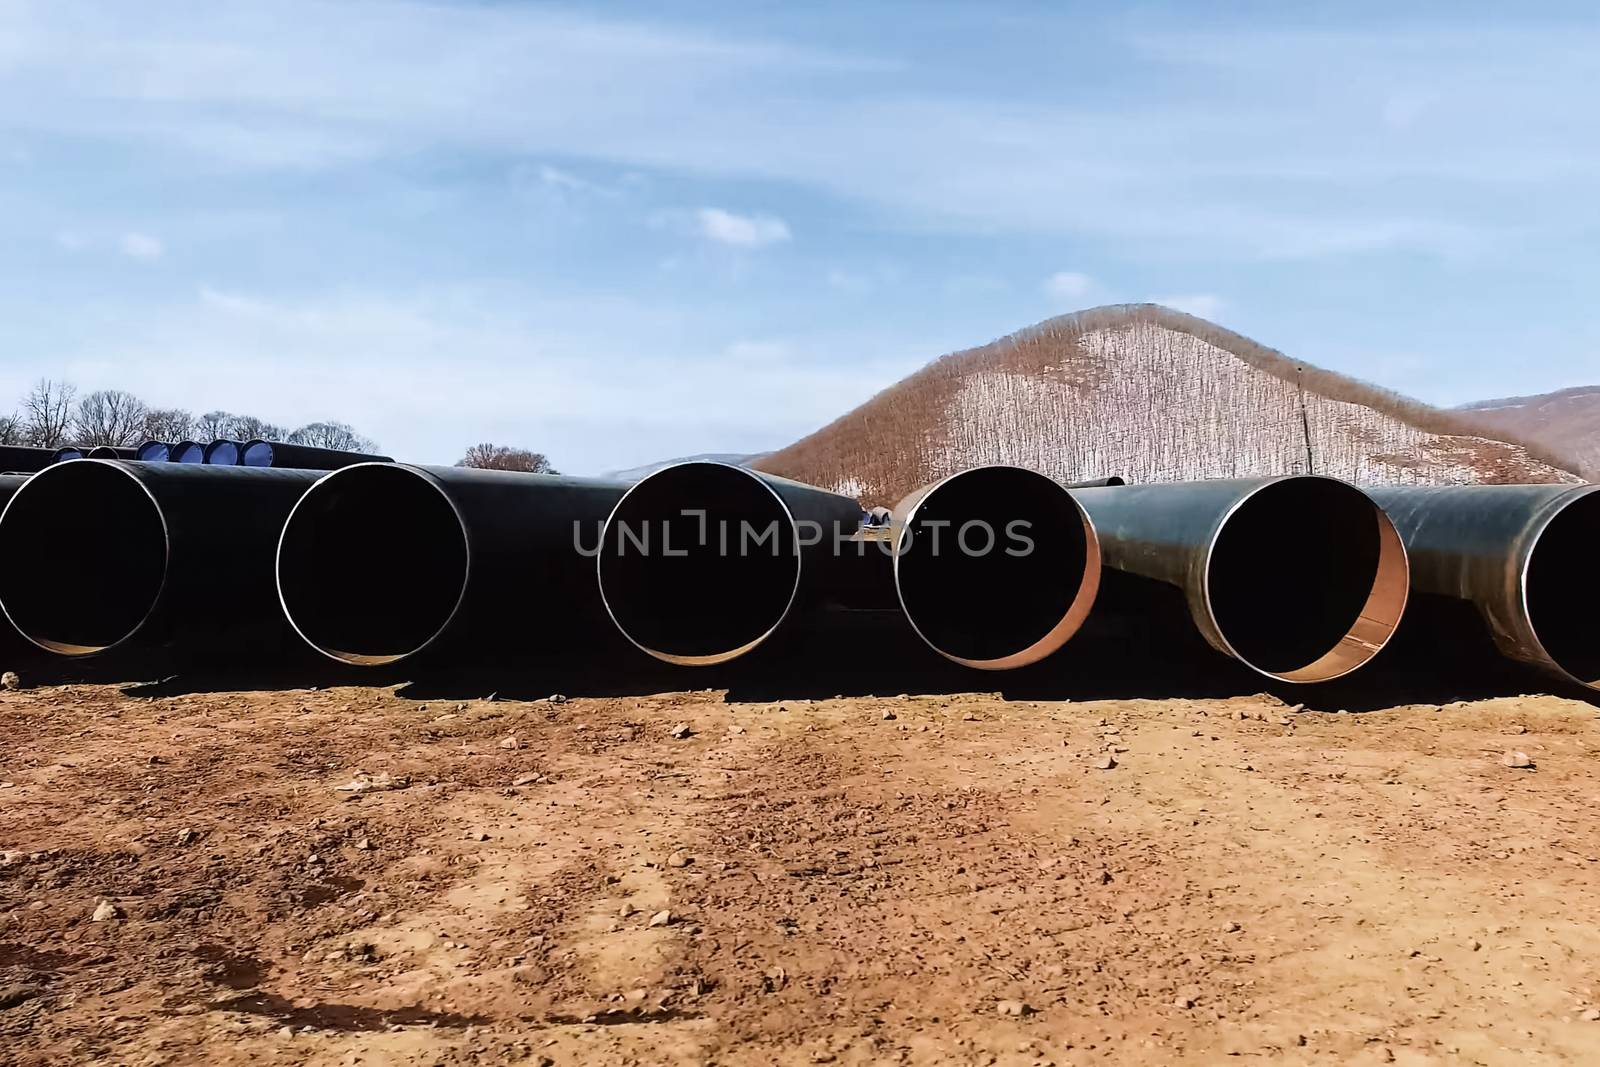 Pipes of a gas pipeline, construction and laying of pipelines for transportation of gas and oil.